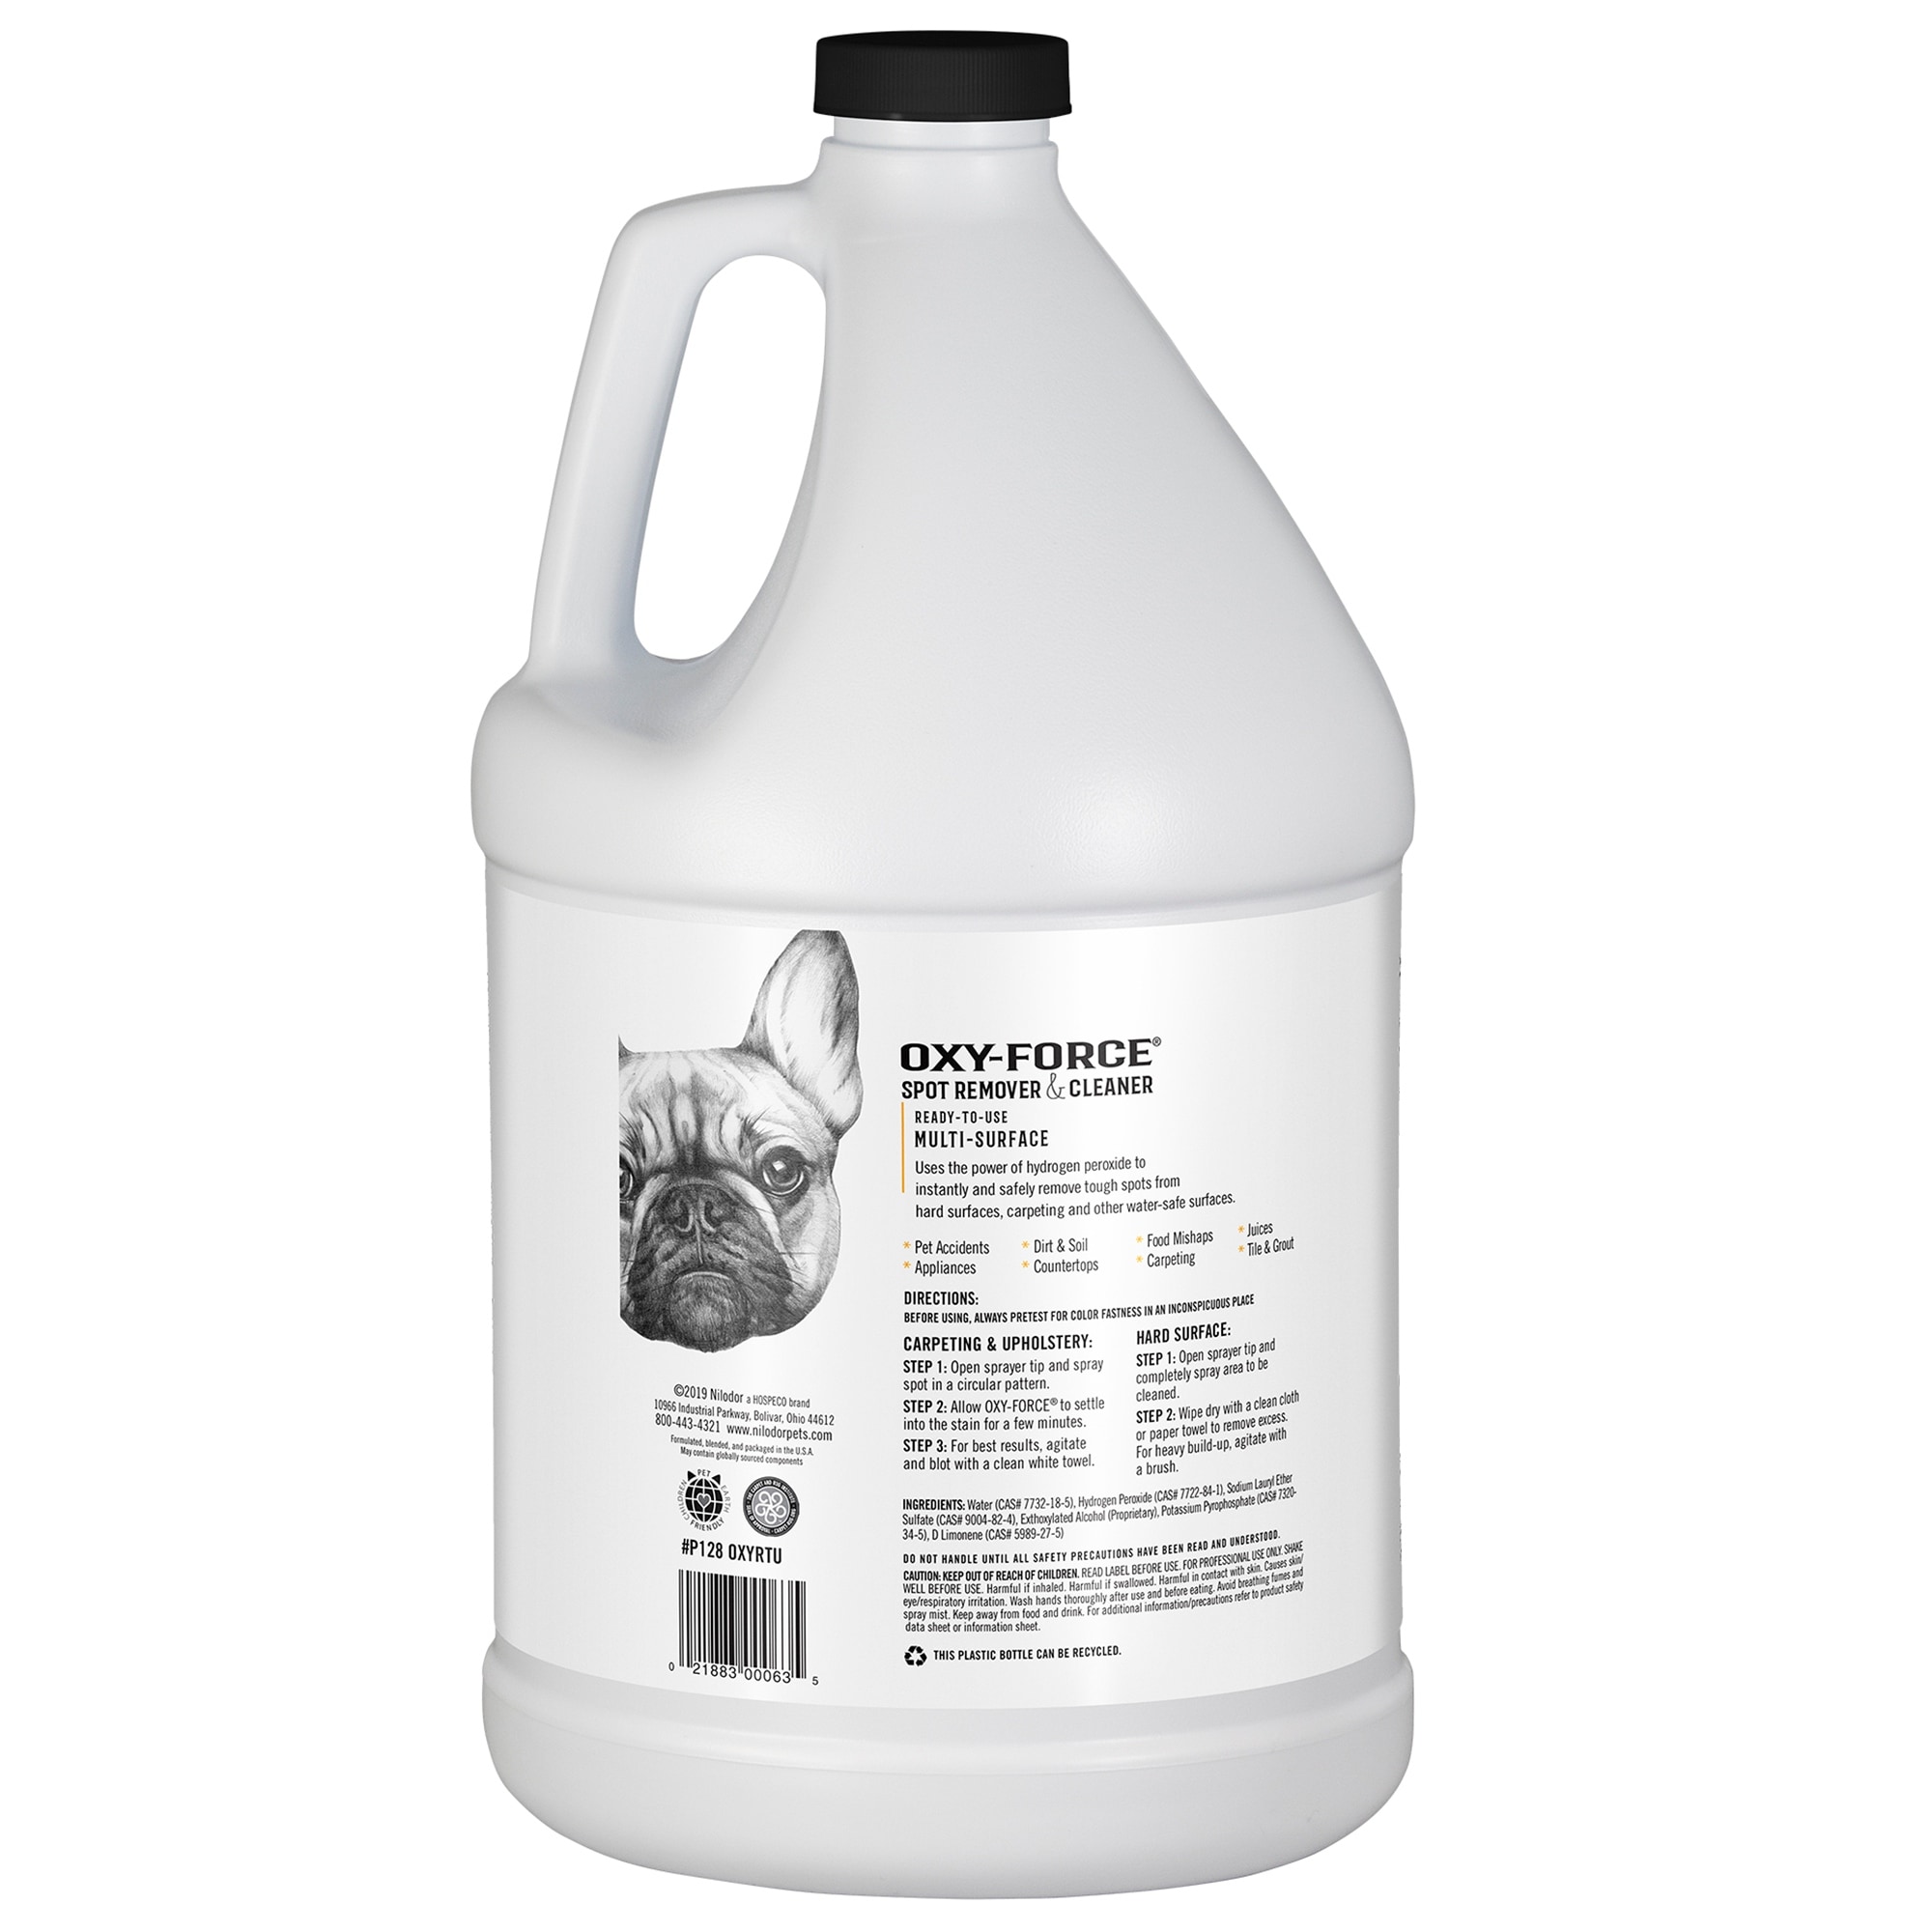 Oxy Carpet & Upholstery Cleaner 1 gal